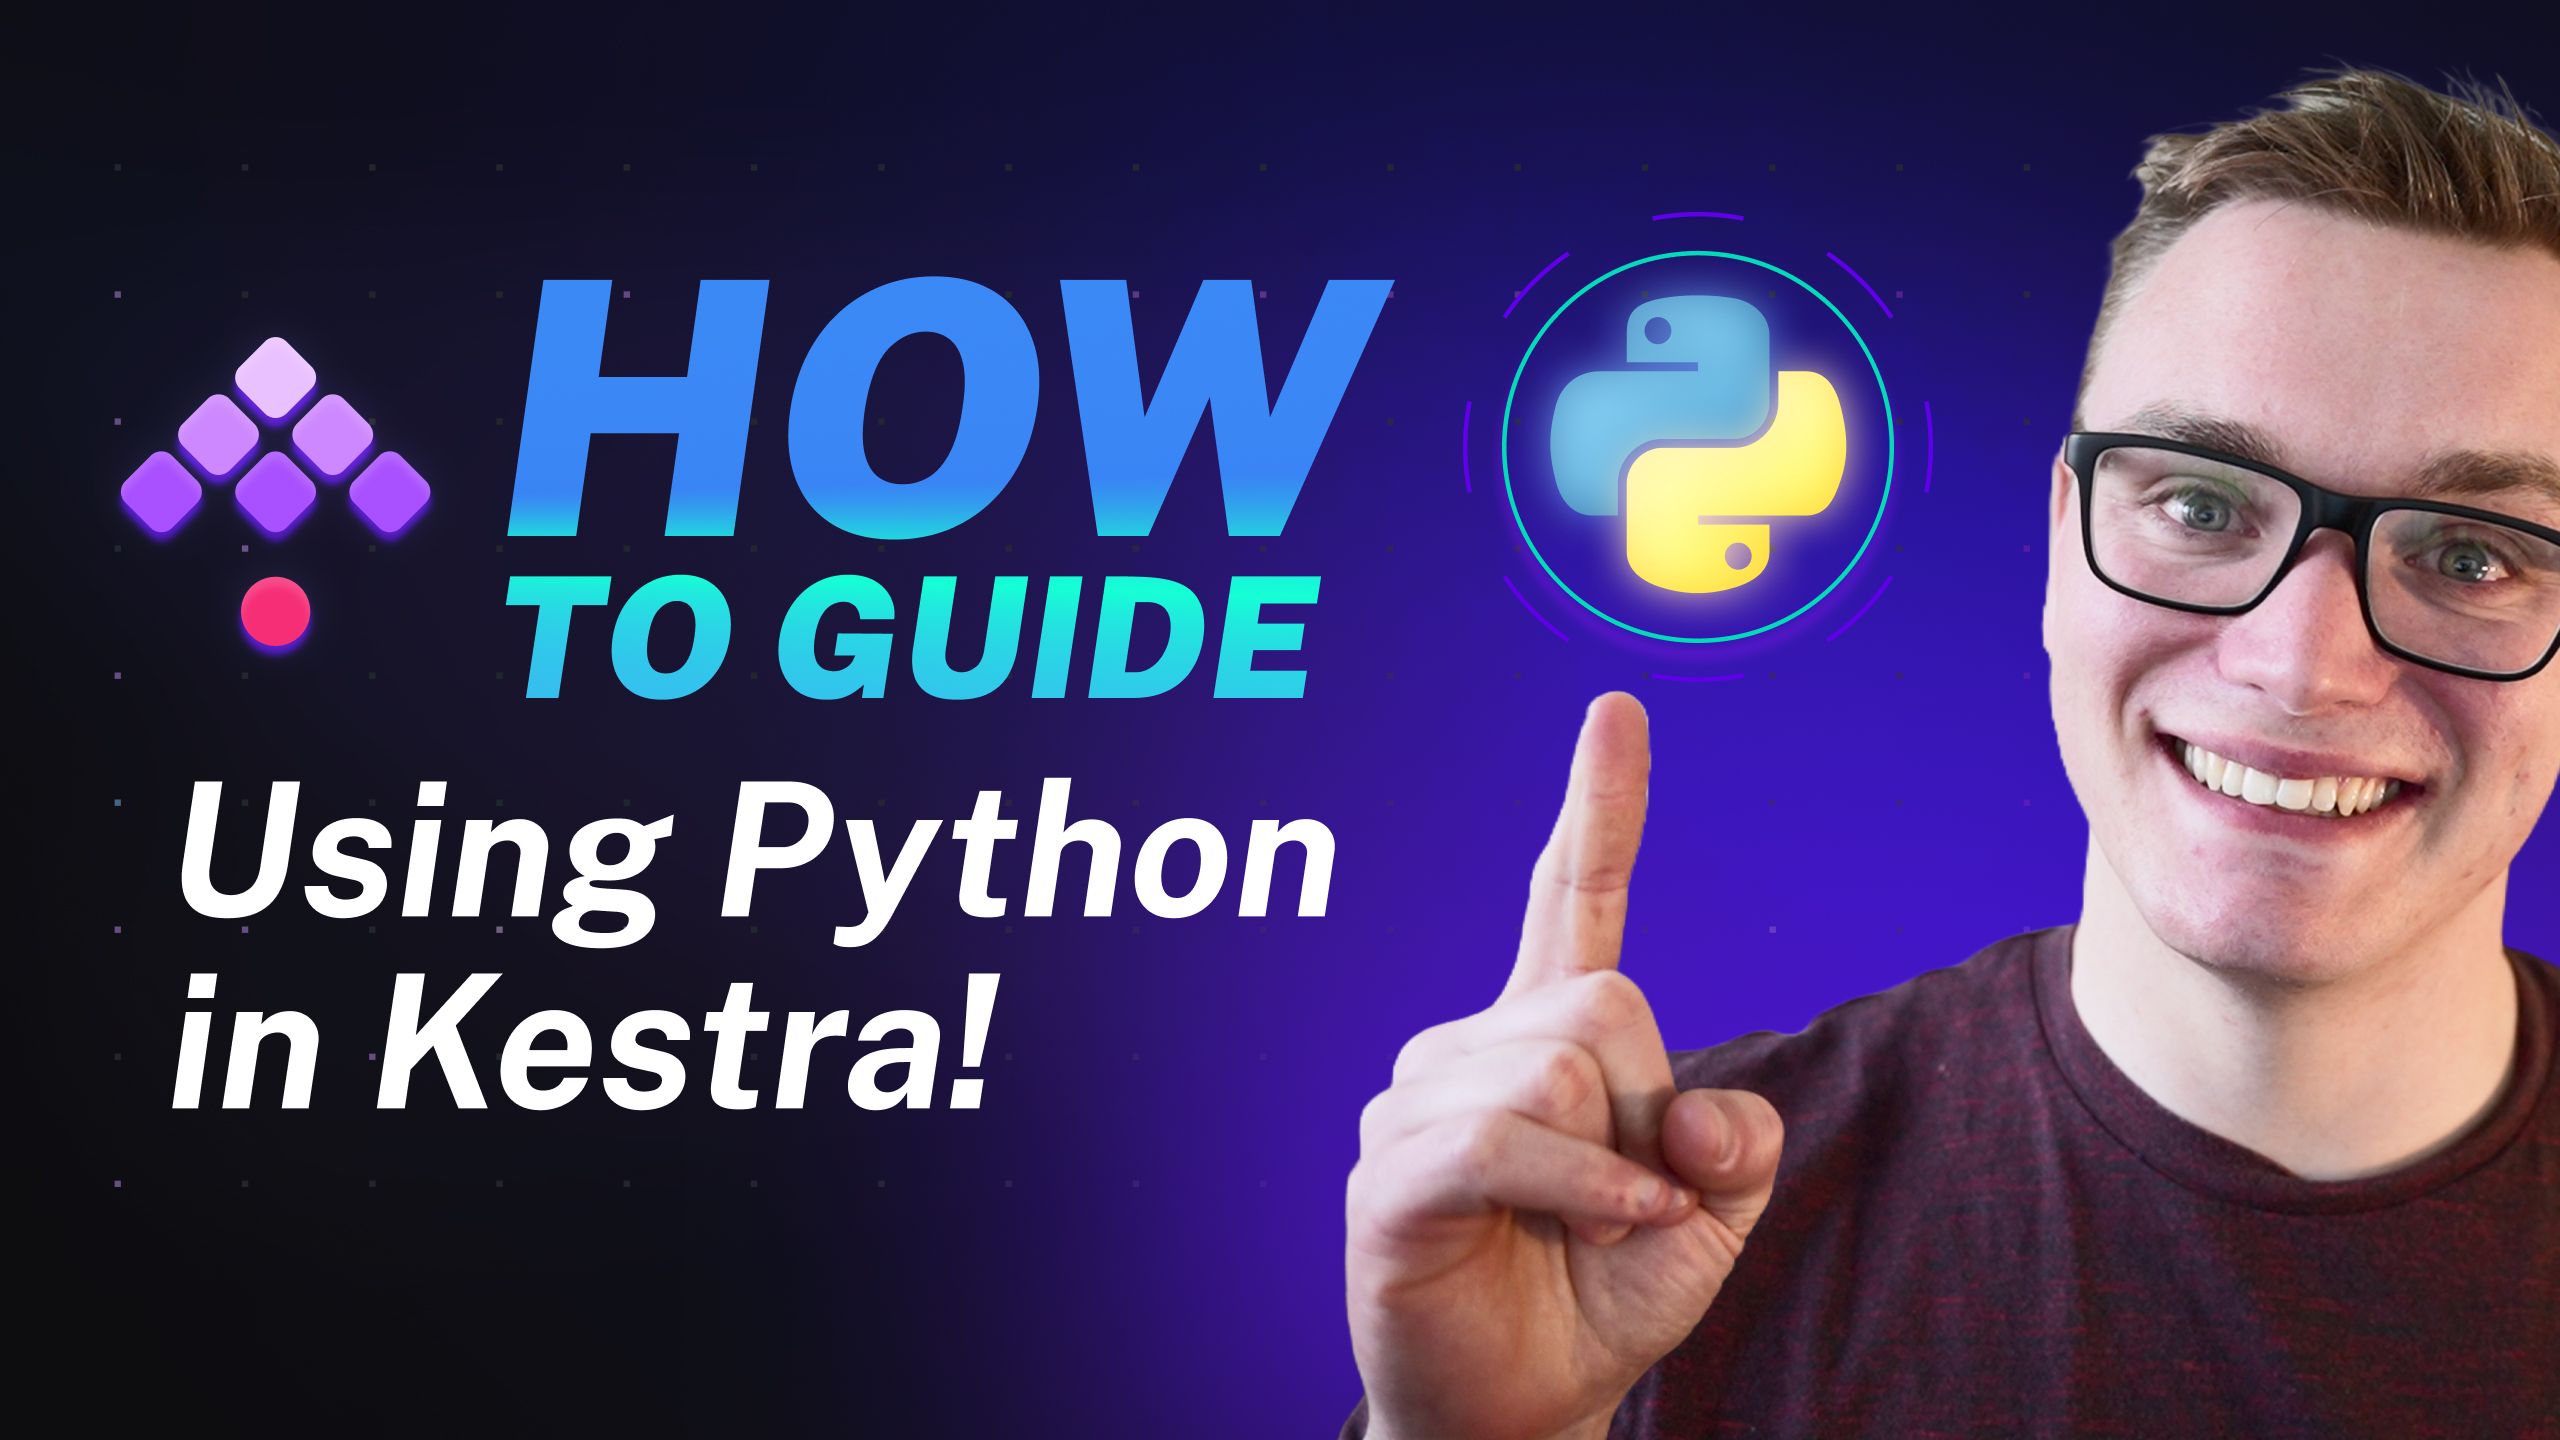 How-to Guide: Using Python In Kestra